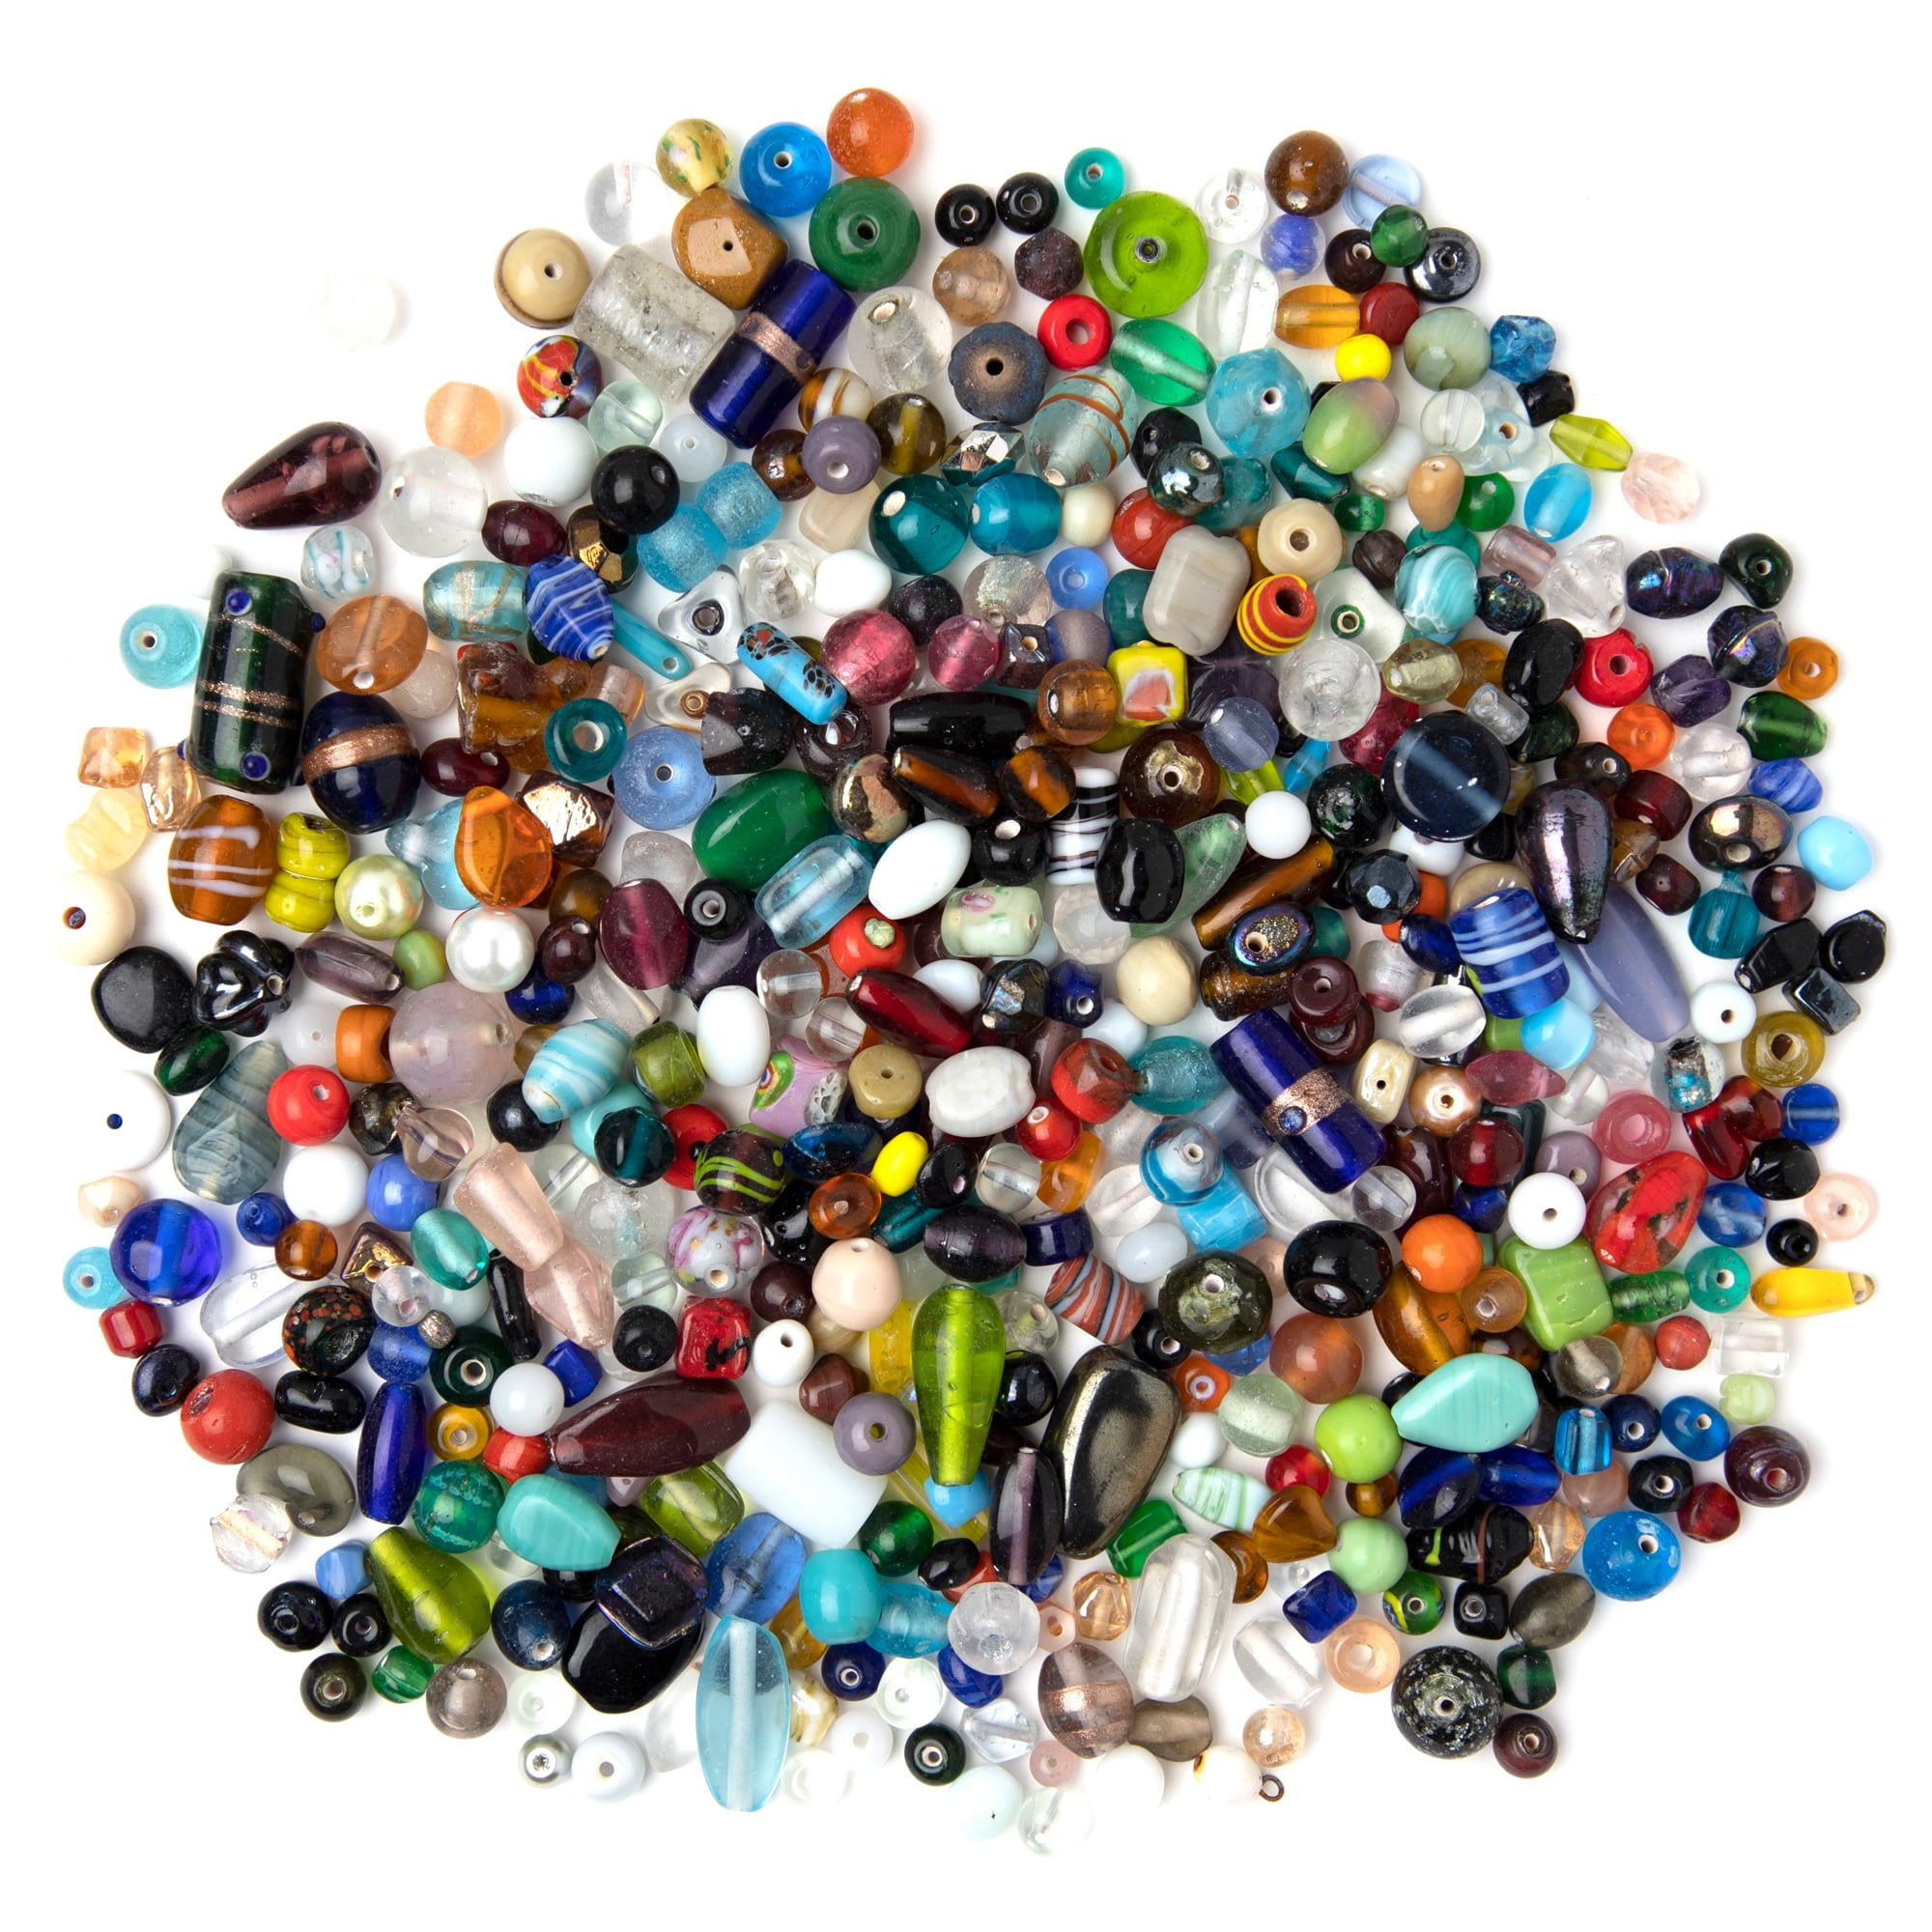 500g/bag Corlorful Beads in Different Shapes and Colors for Making  Necklaces Bracelets Crafts